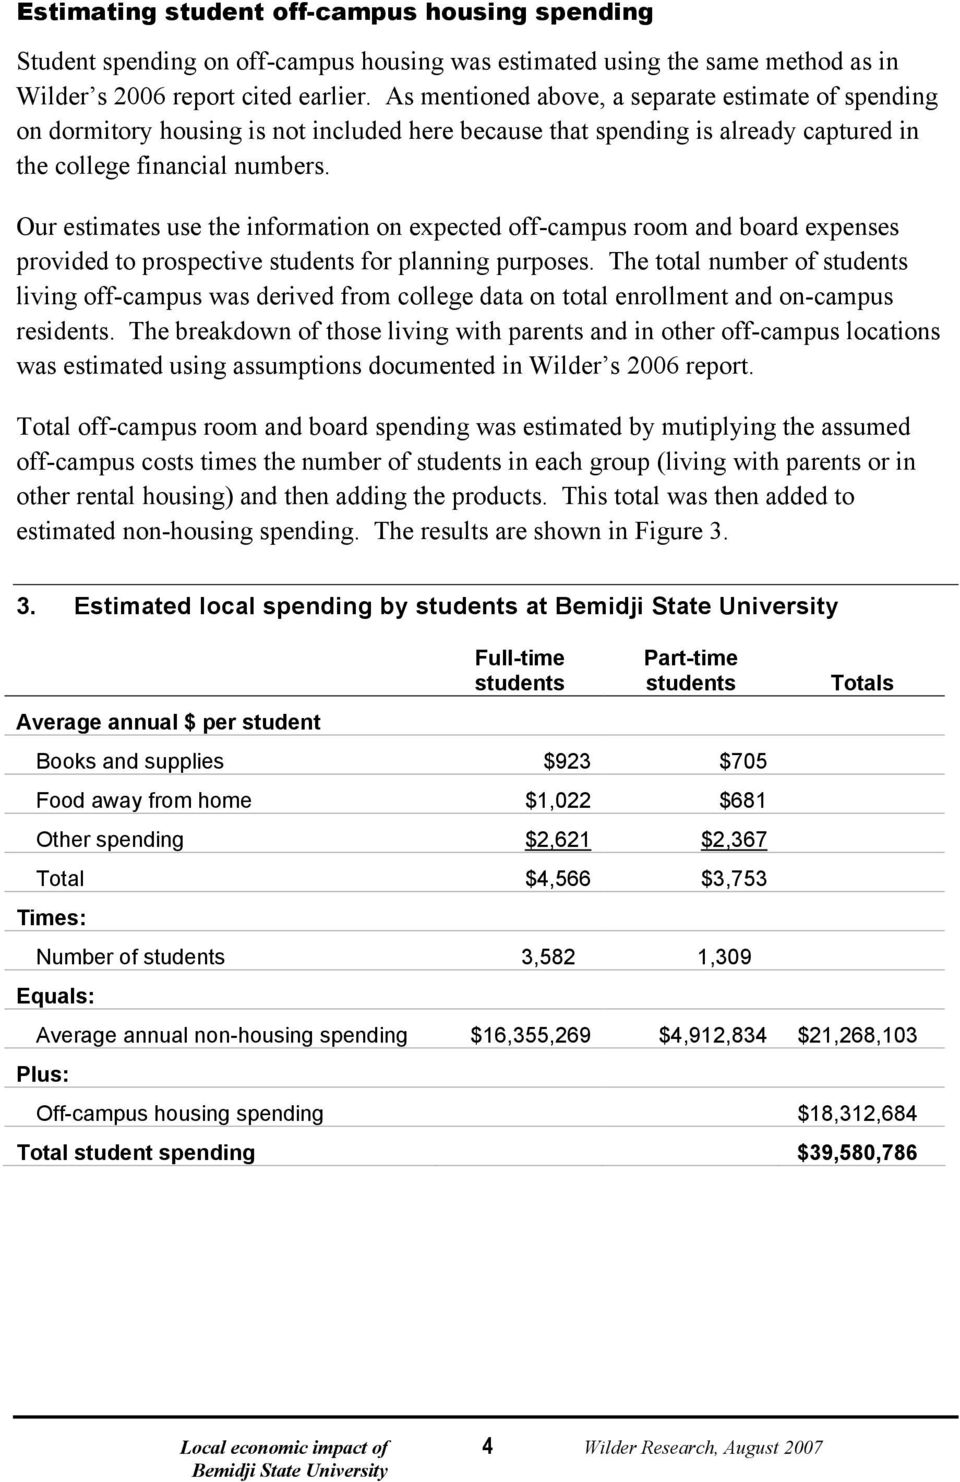 Our estimates use the information on expected off-campus room and board expenses provided to prospective students for planning purposes.